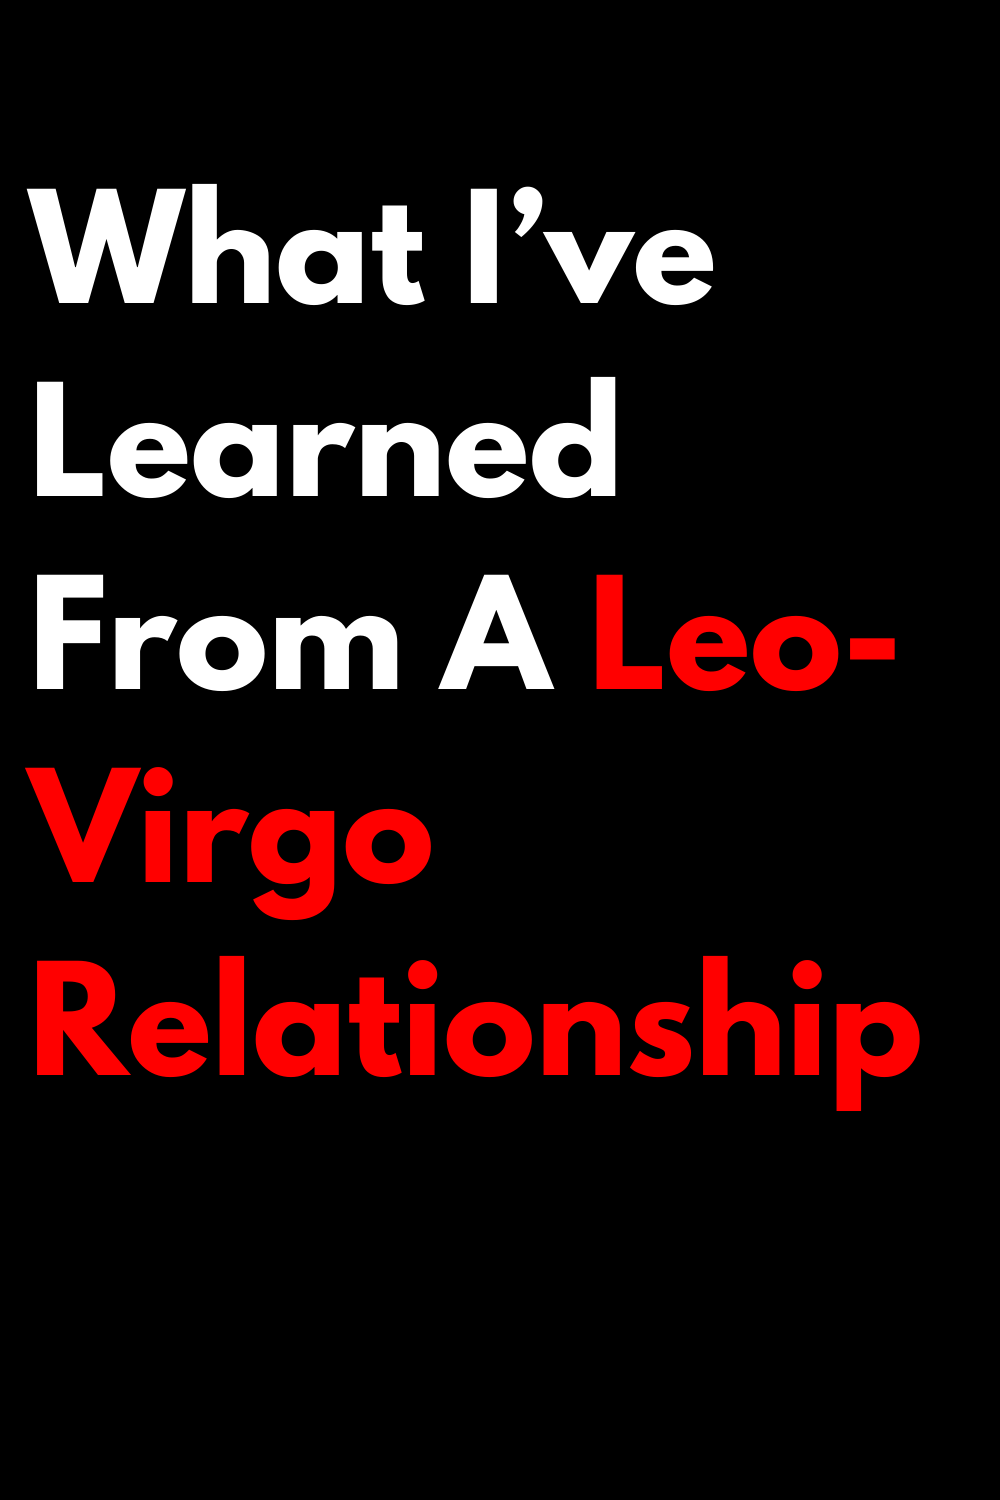 What I’ve Learned From A Leo-Virgo Relationship